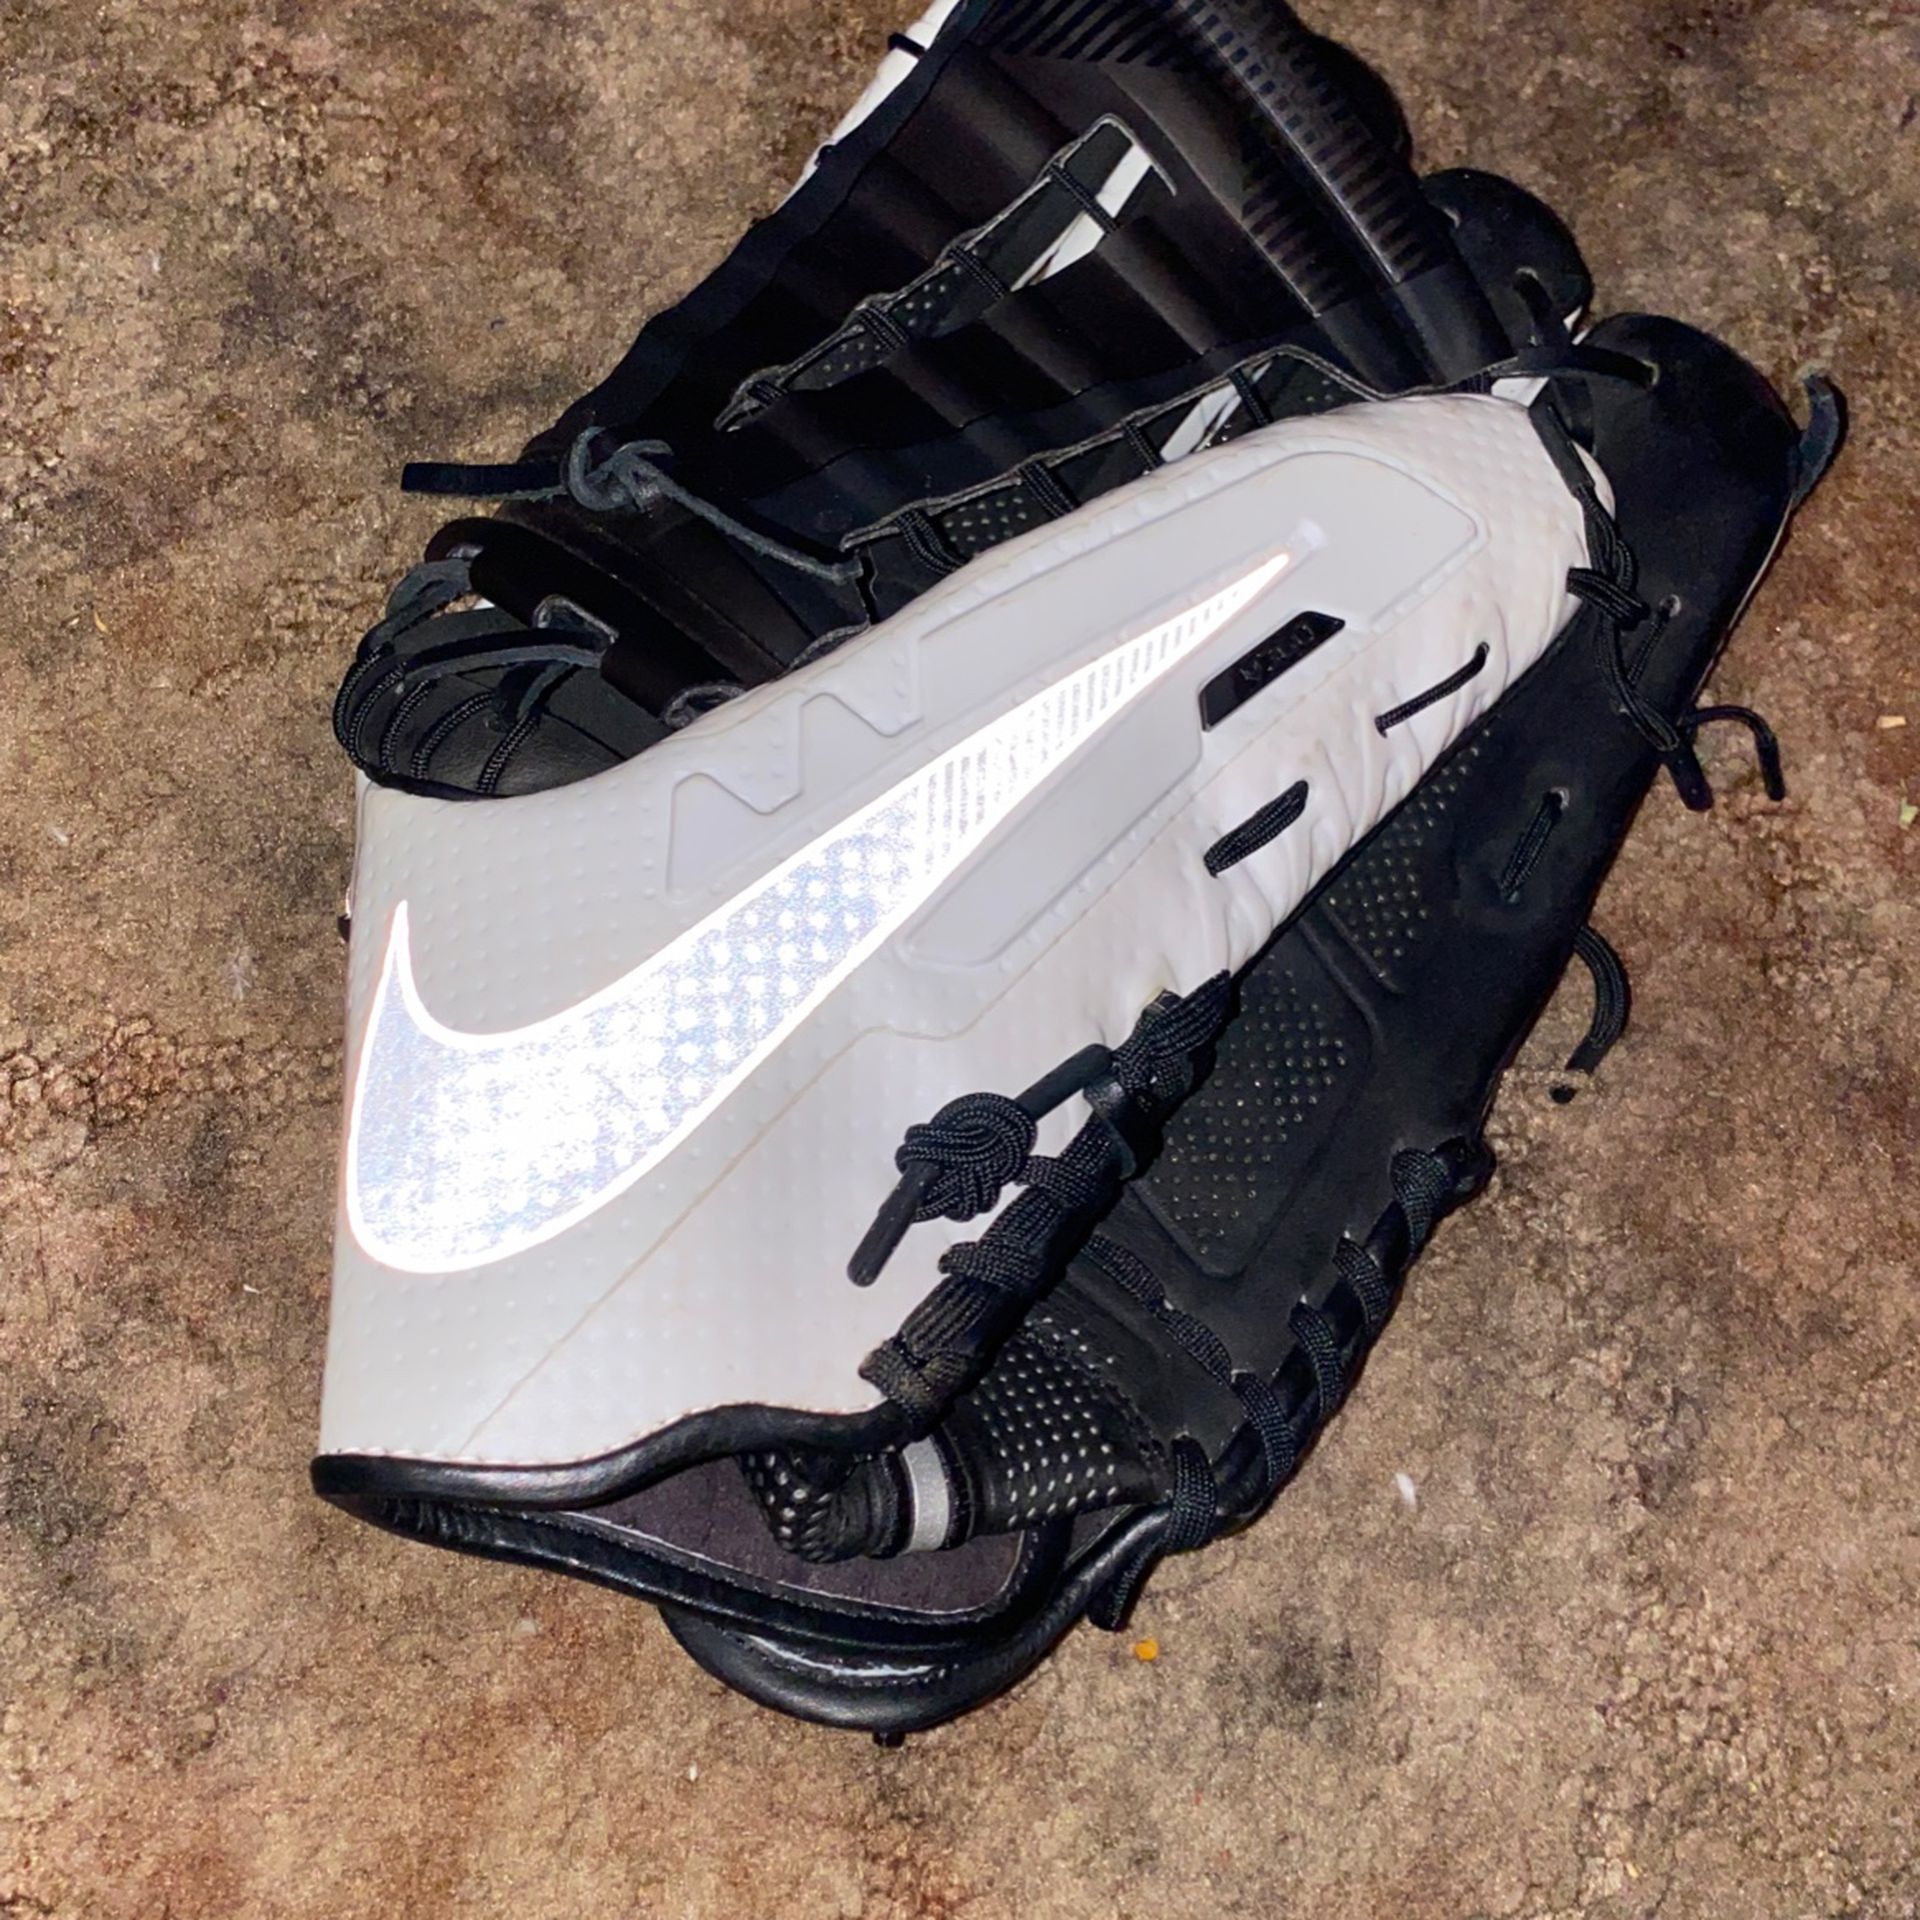 Reflective Nike Hyperfuse Outfielders Glove